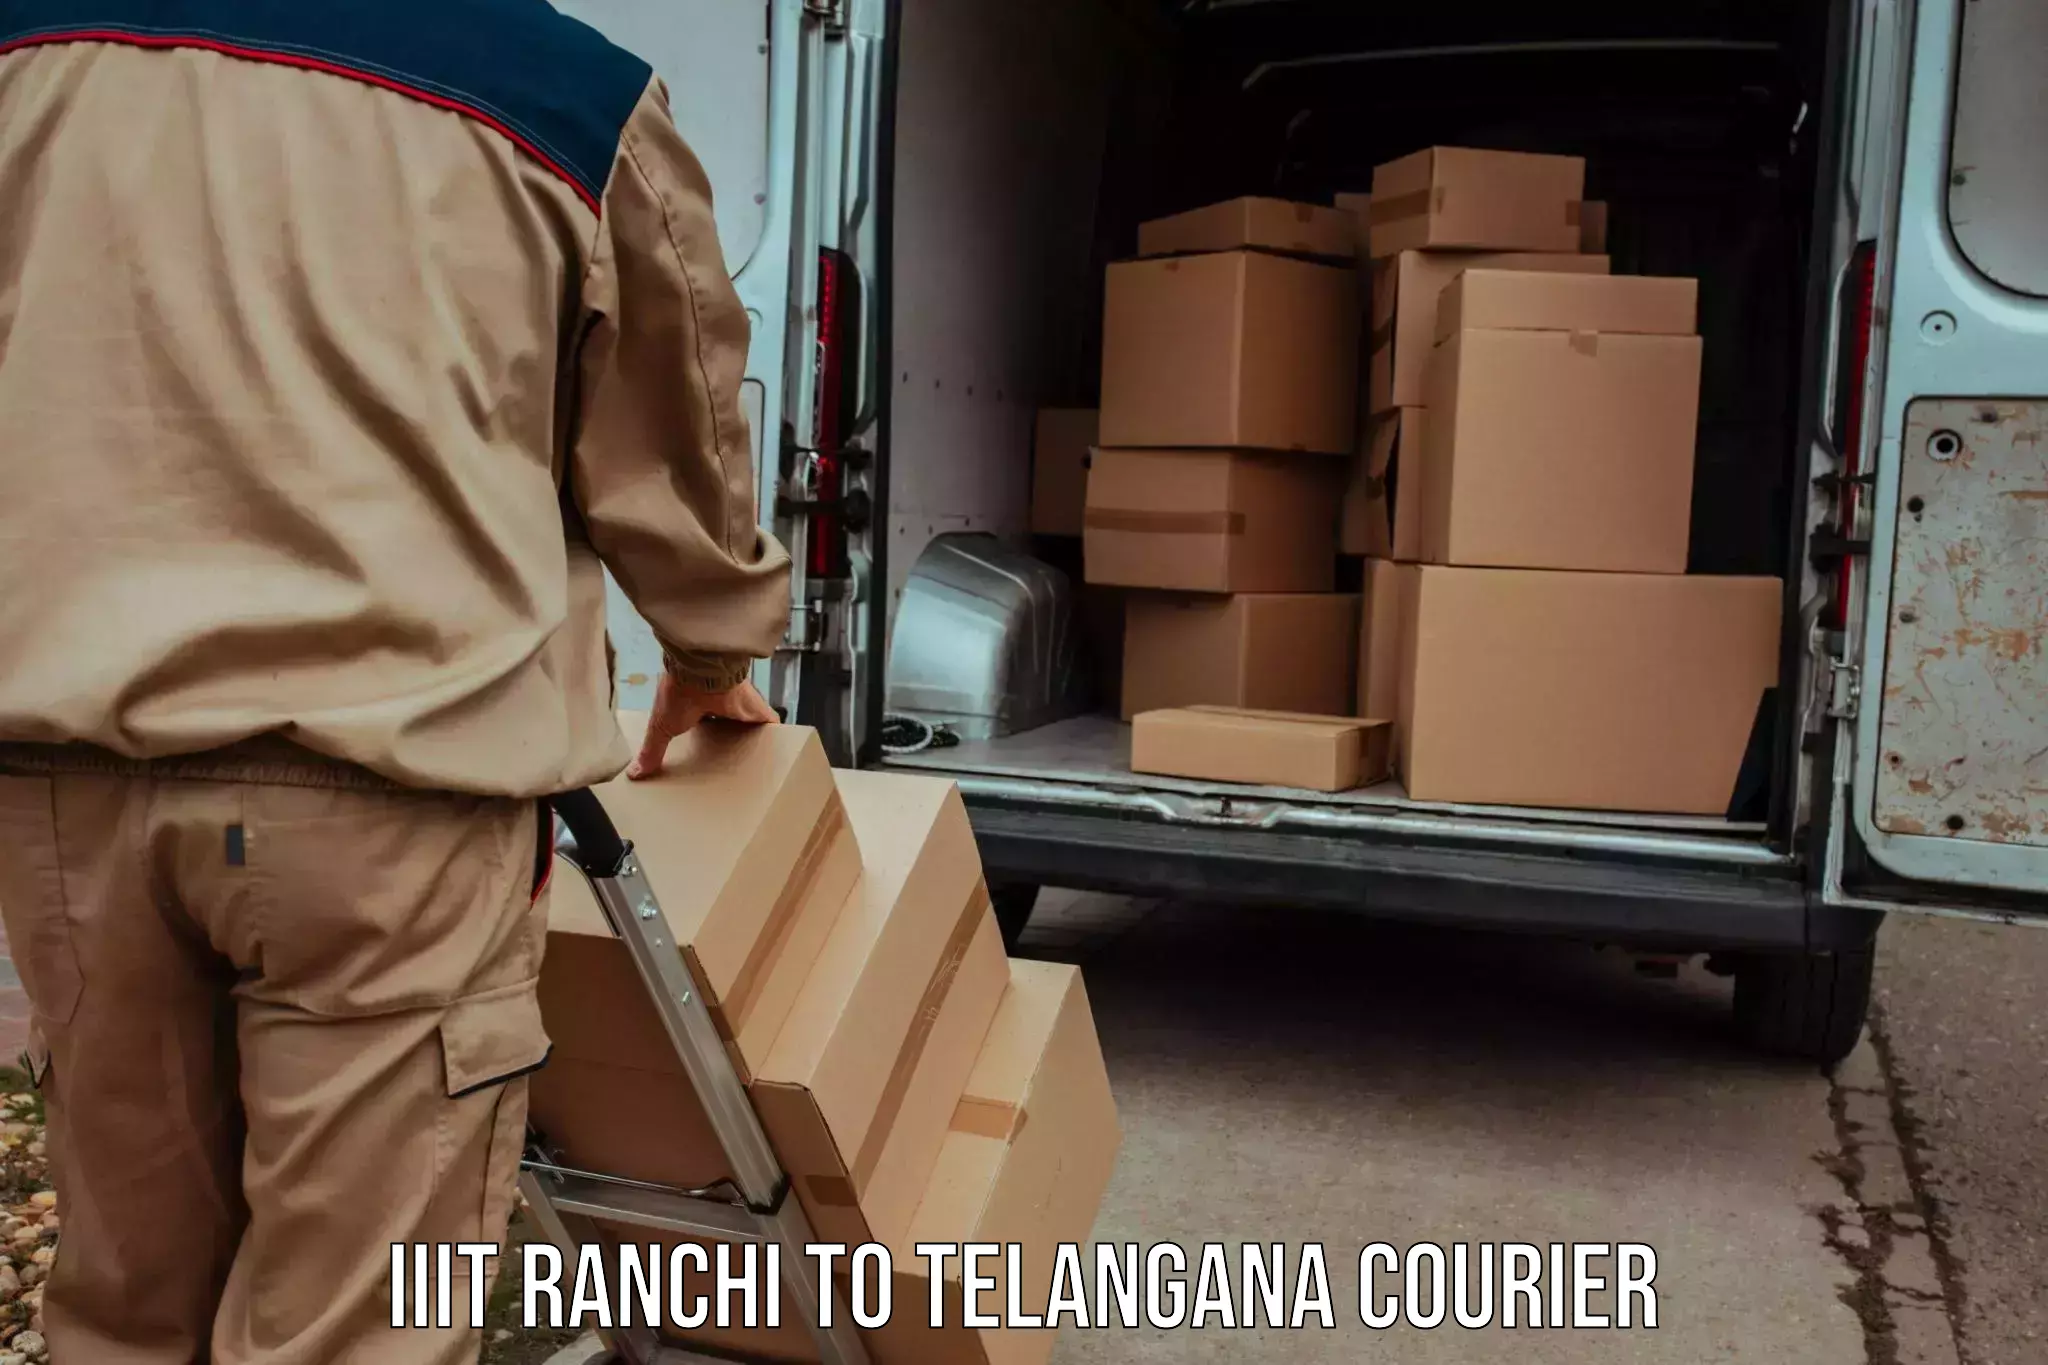 Cost-effective courier options IIIT Ranchi to Secunderabad